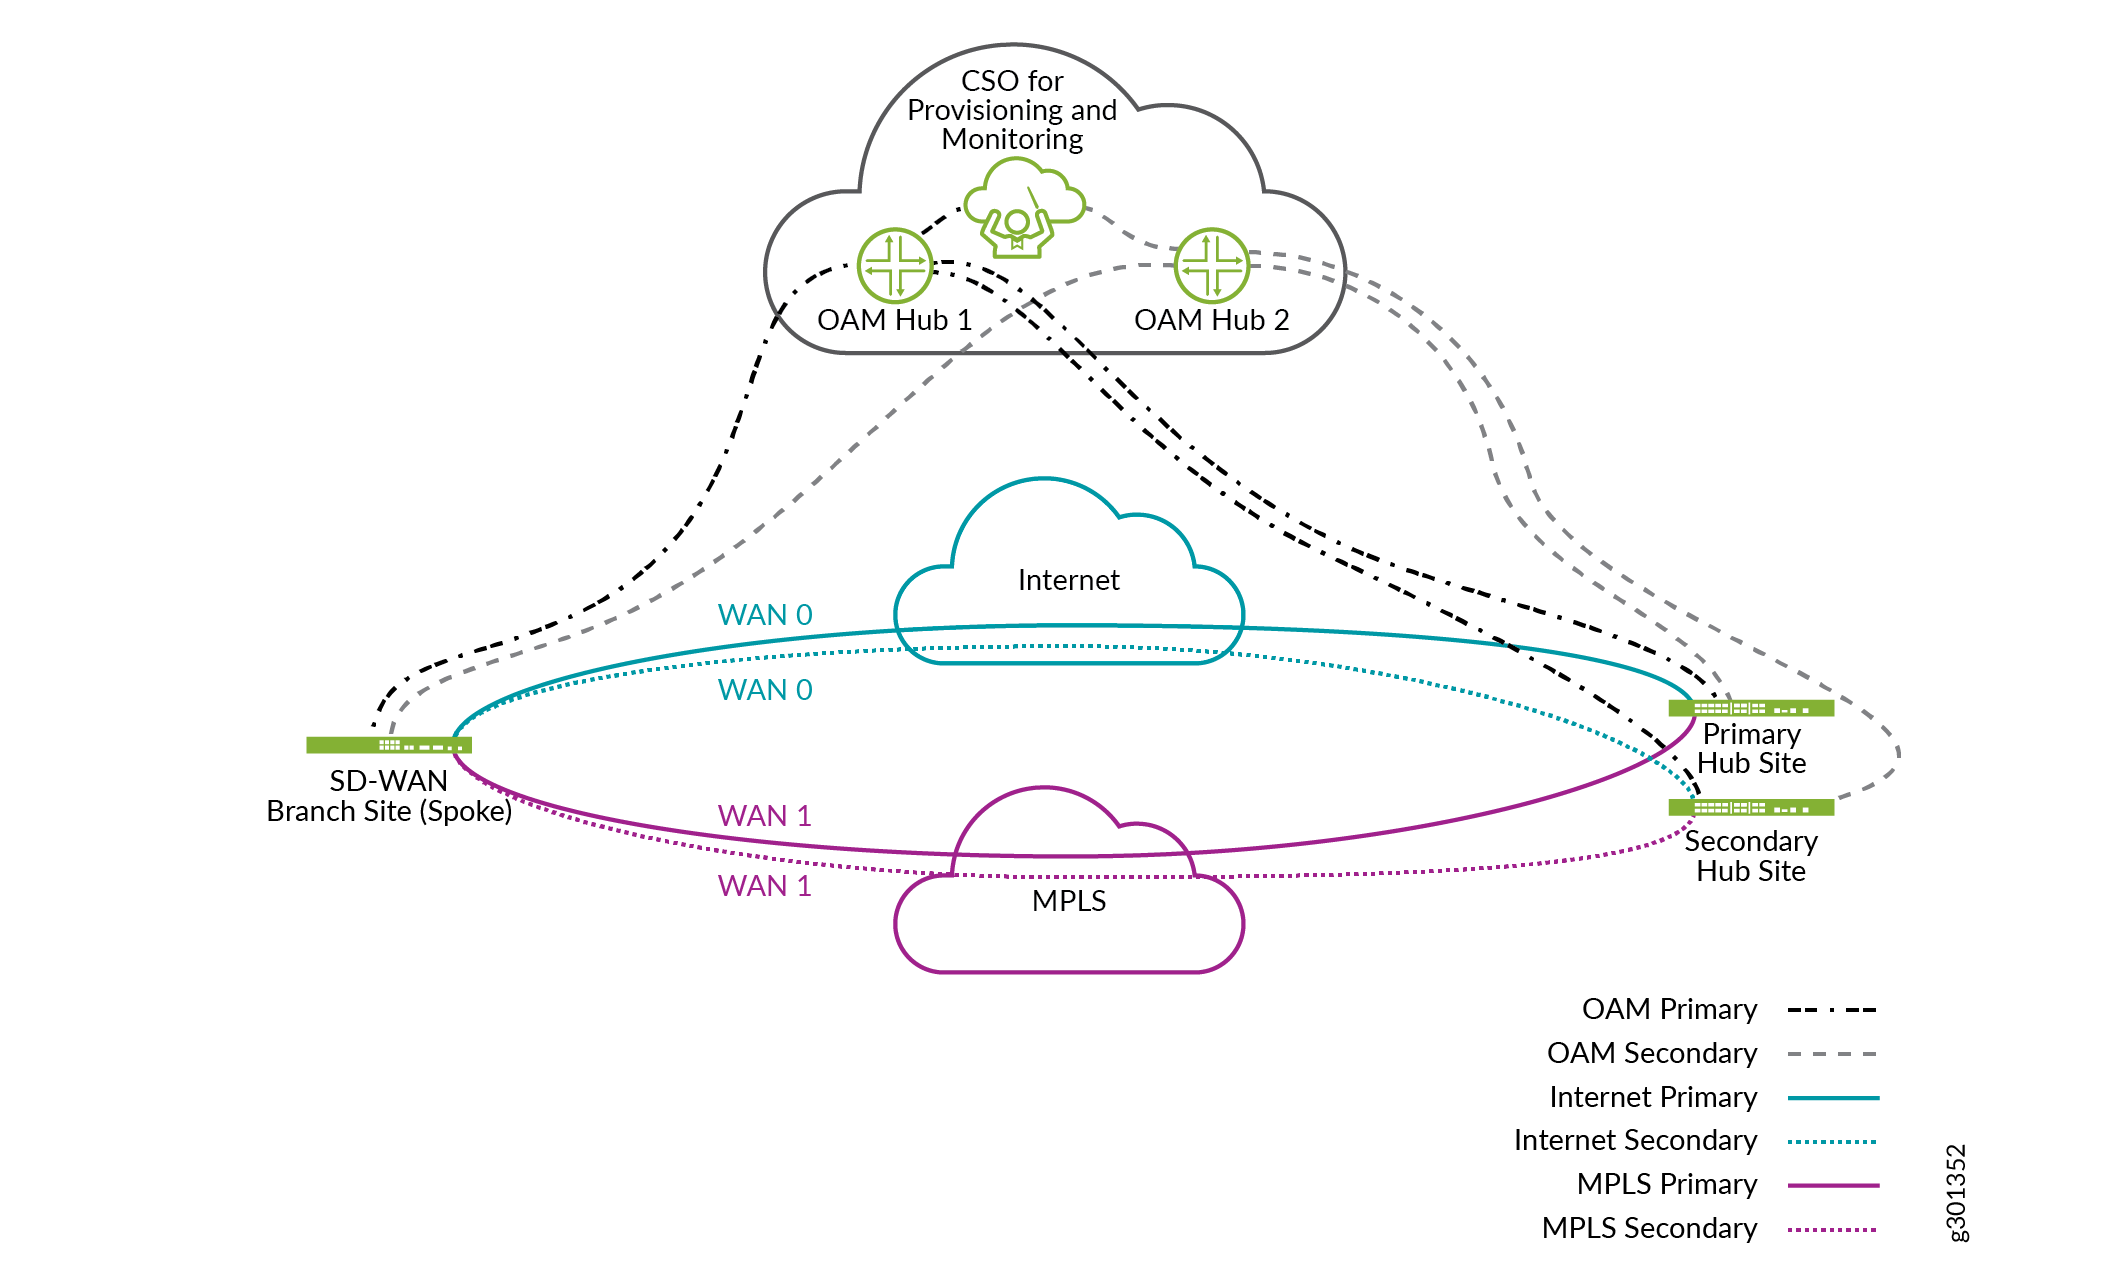 SD-WAN Topology
with Multihoming and OAM Hub Redundancy